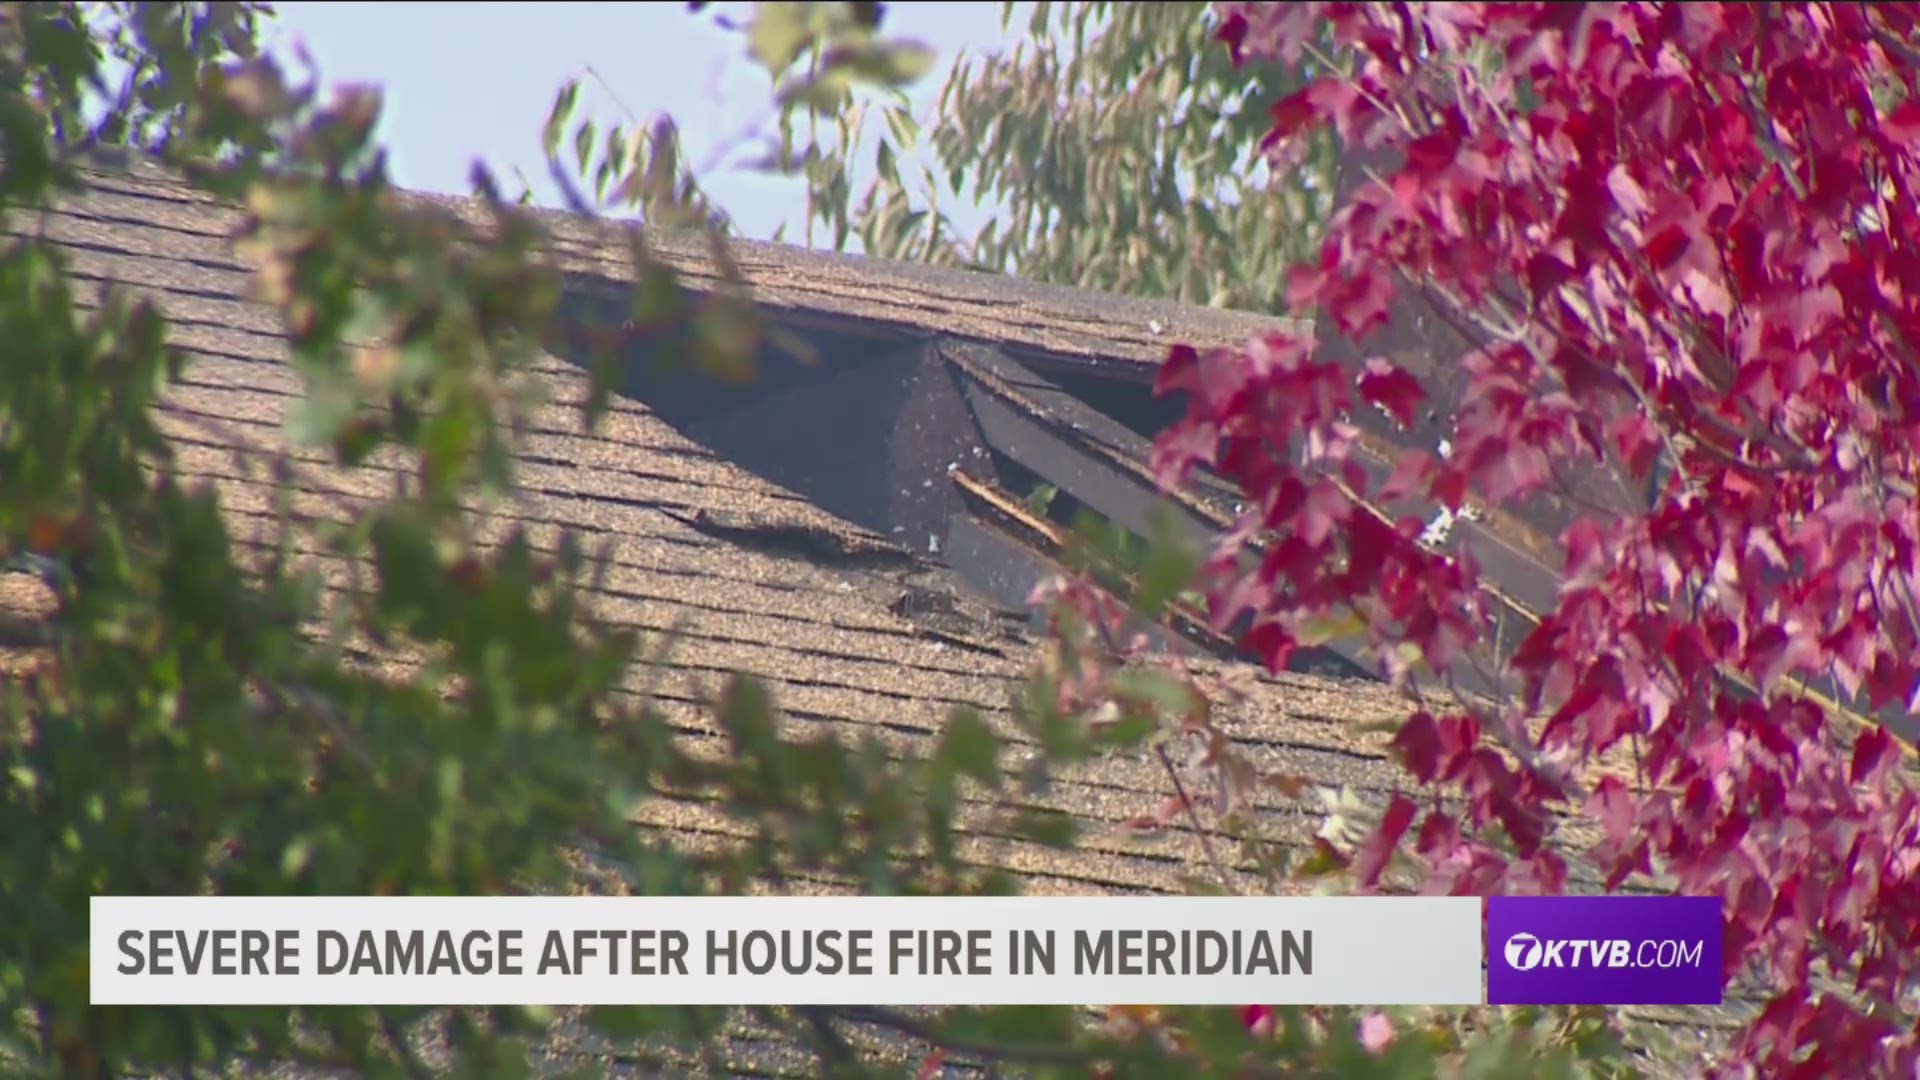 A Sunday afternoon fire in a Meridian home located on Sweetwood Avenue extensively damaged the building and displaced at least one family.